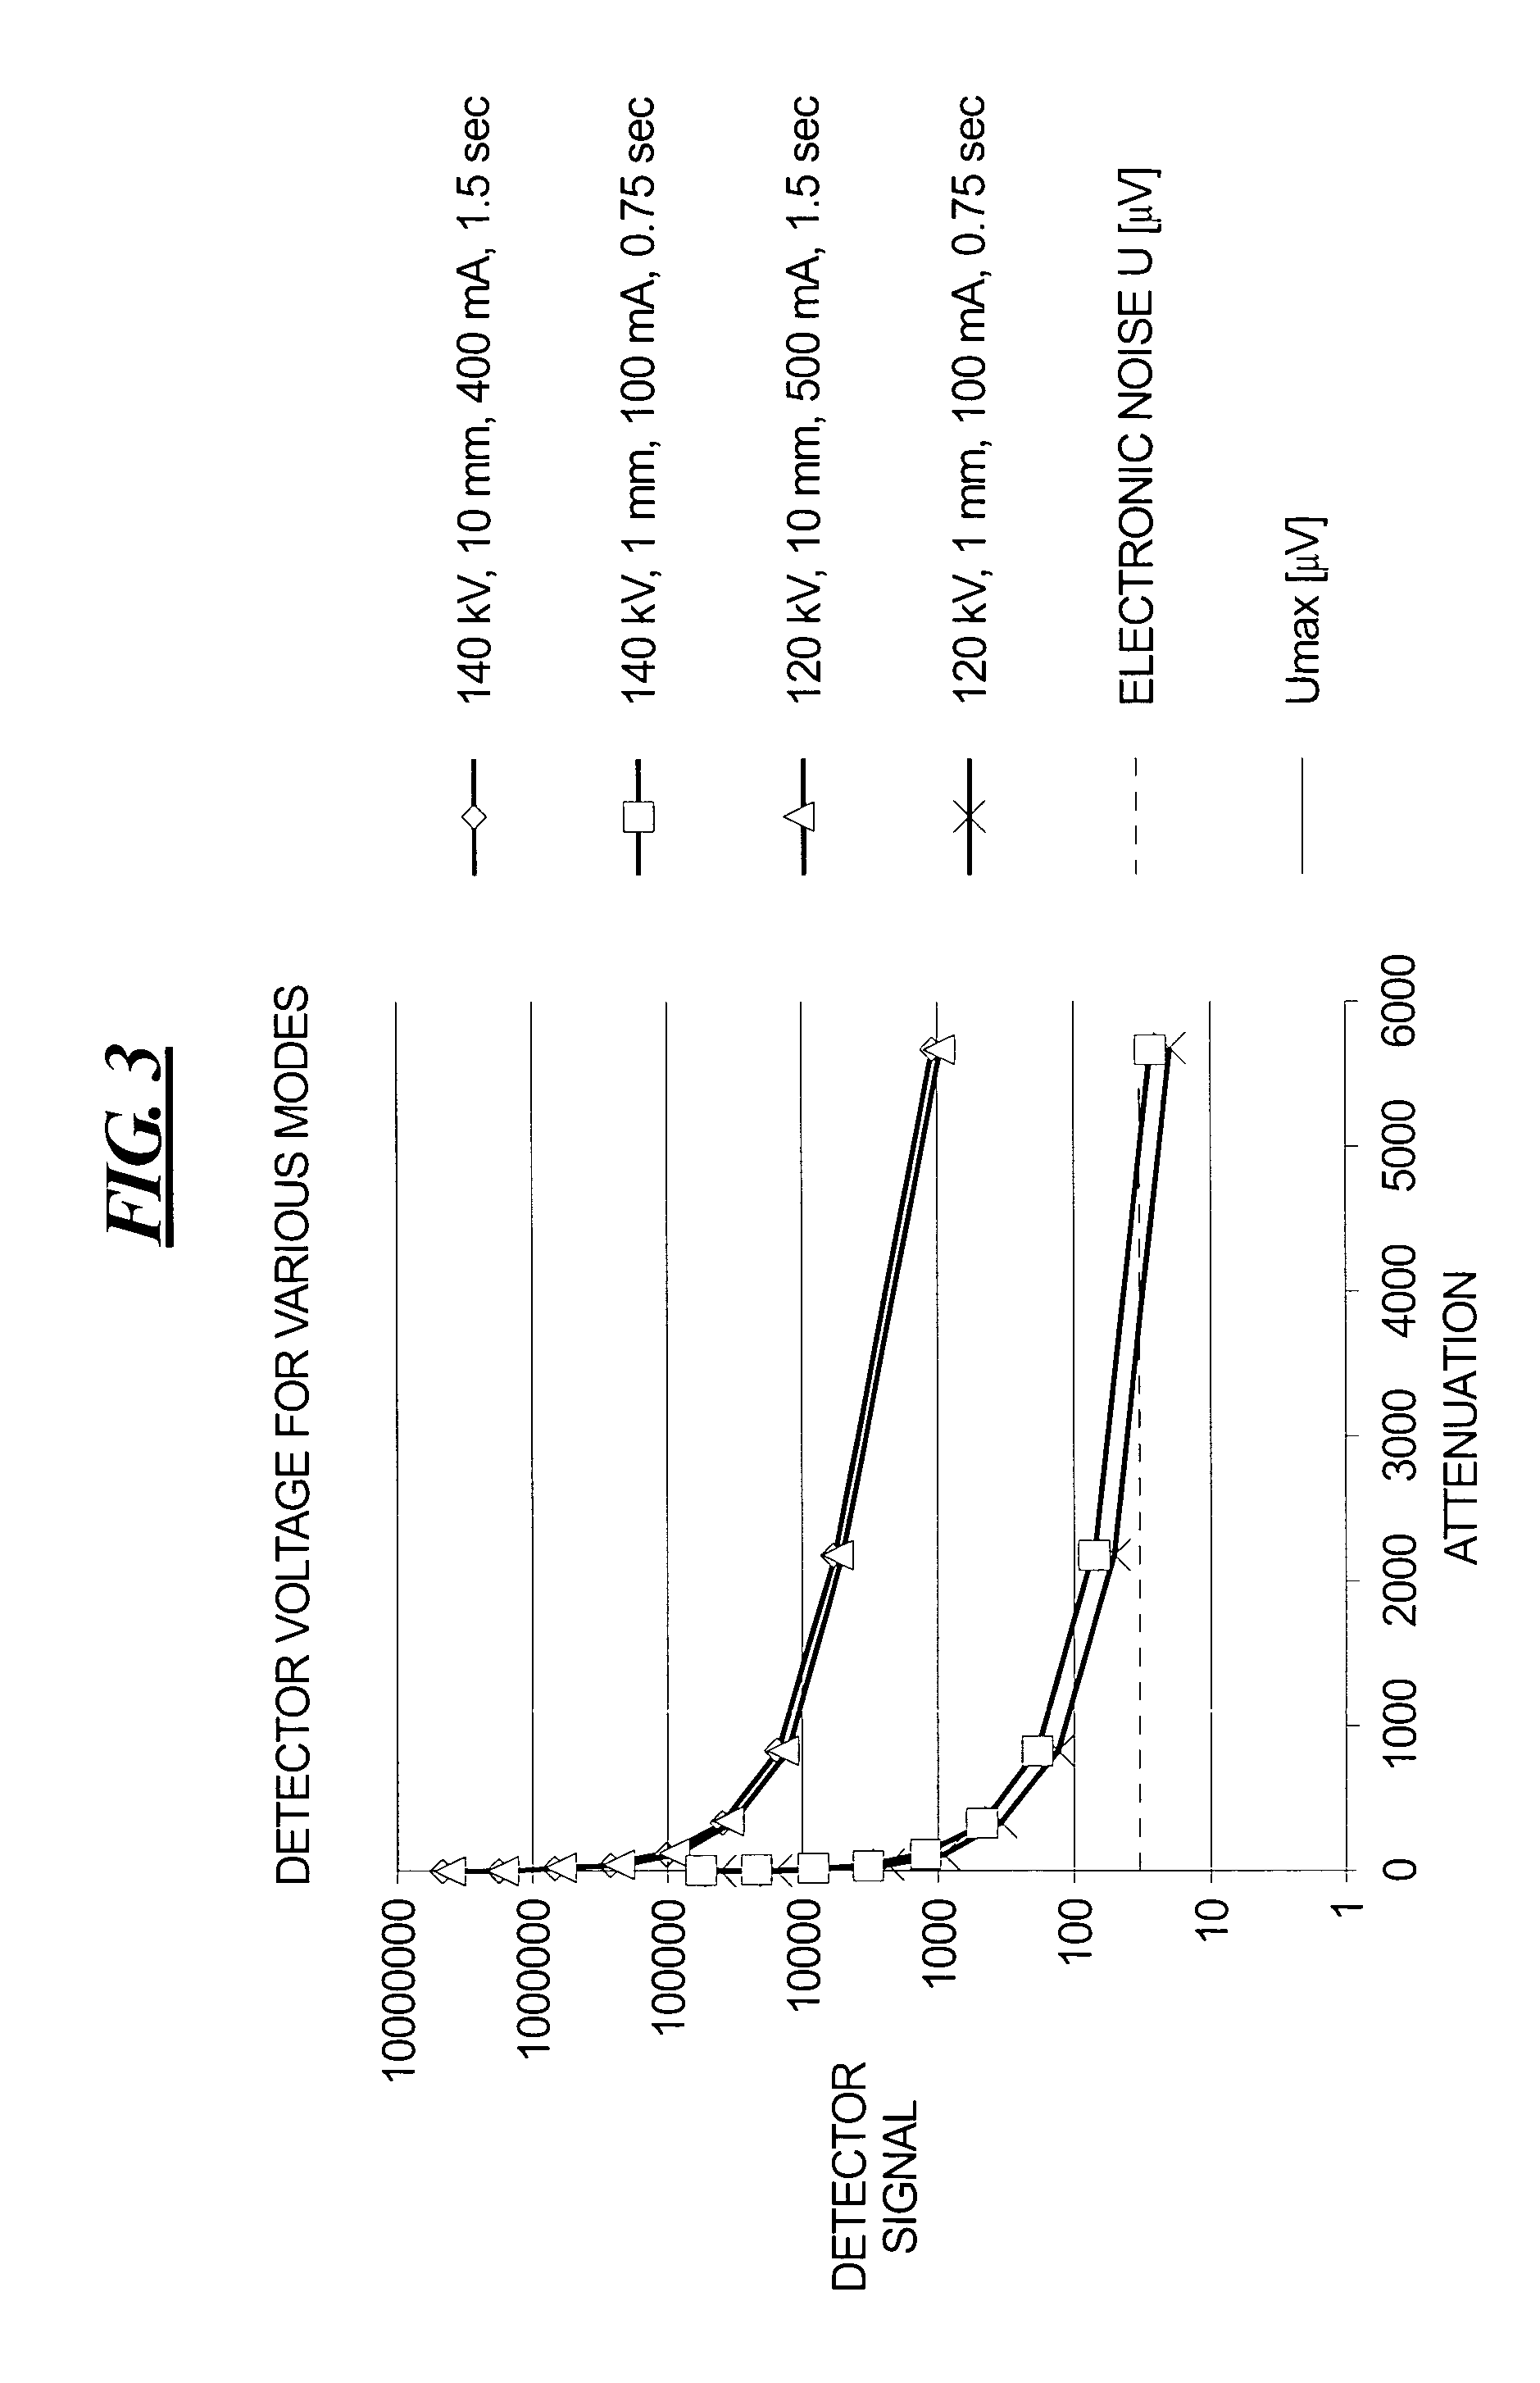 Method for automatically setting an X-ray dosage for producing an X-ray tomographic image